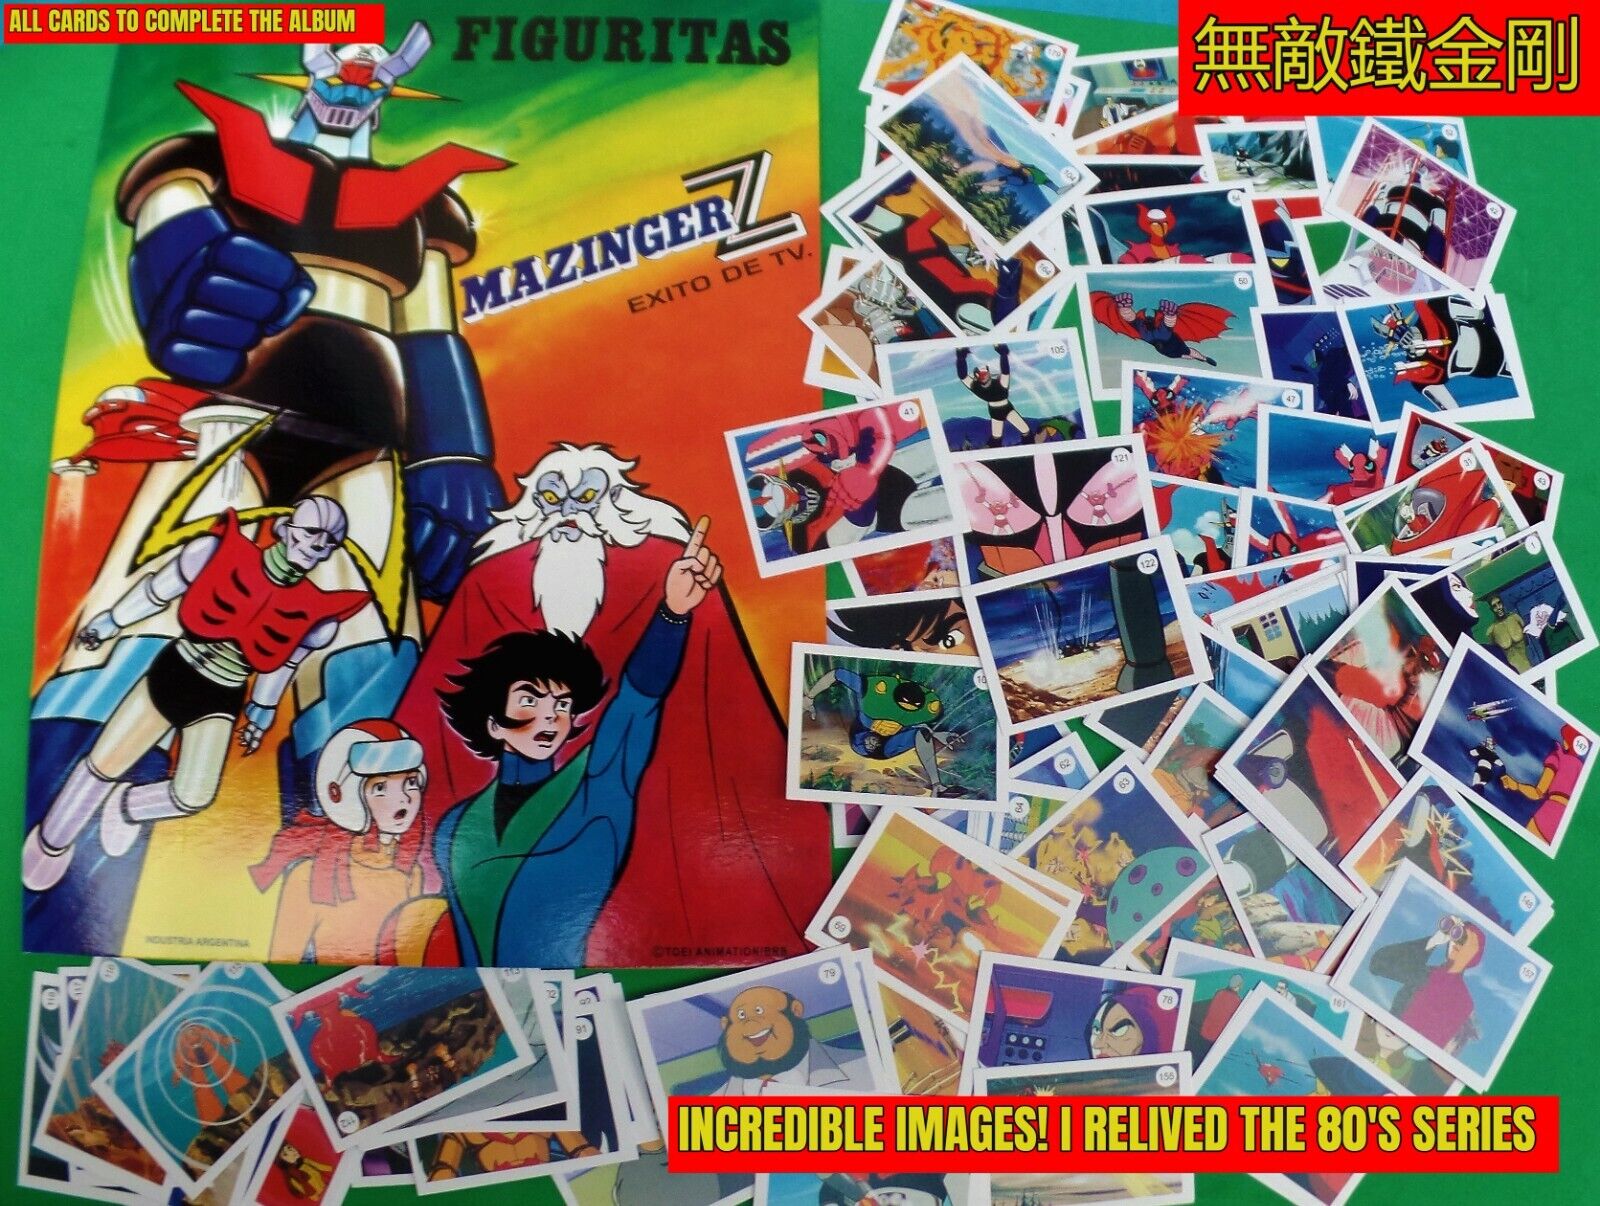 Mazinger Z  1984 Nostalgic Album and all the cards to complete it .For Collector